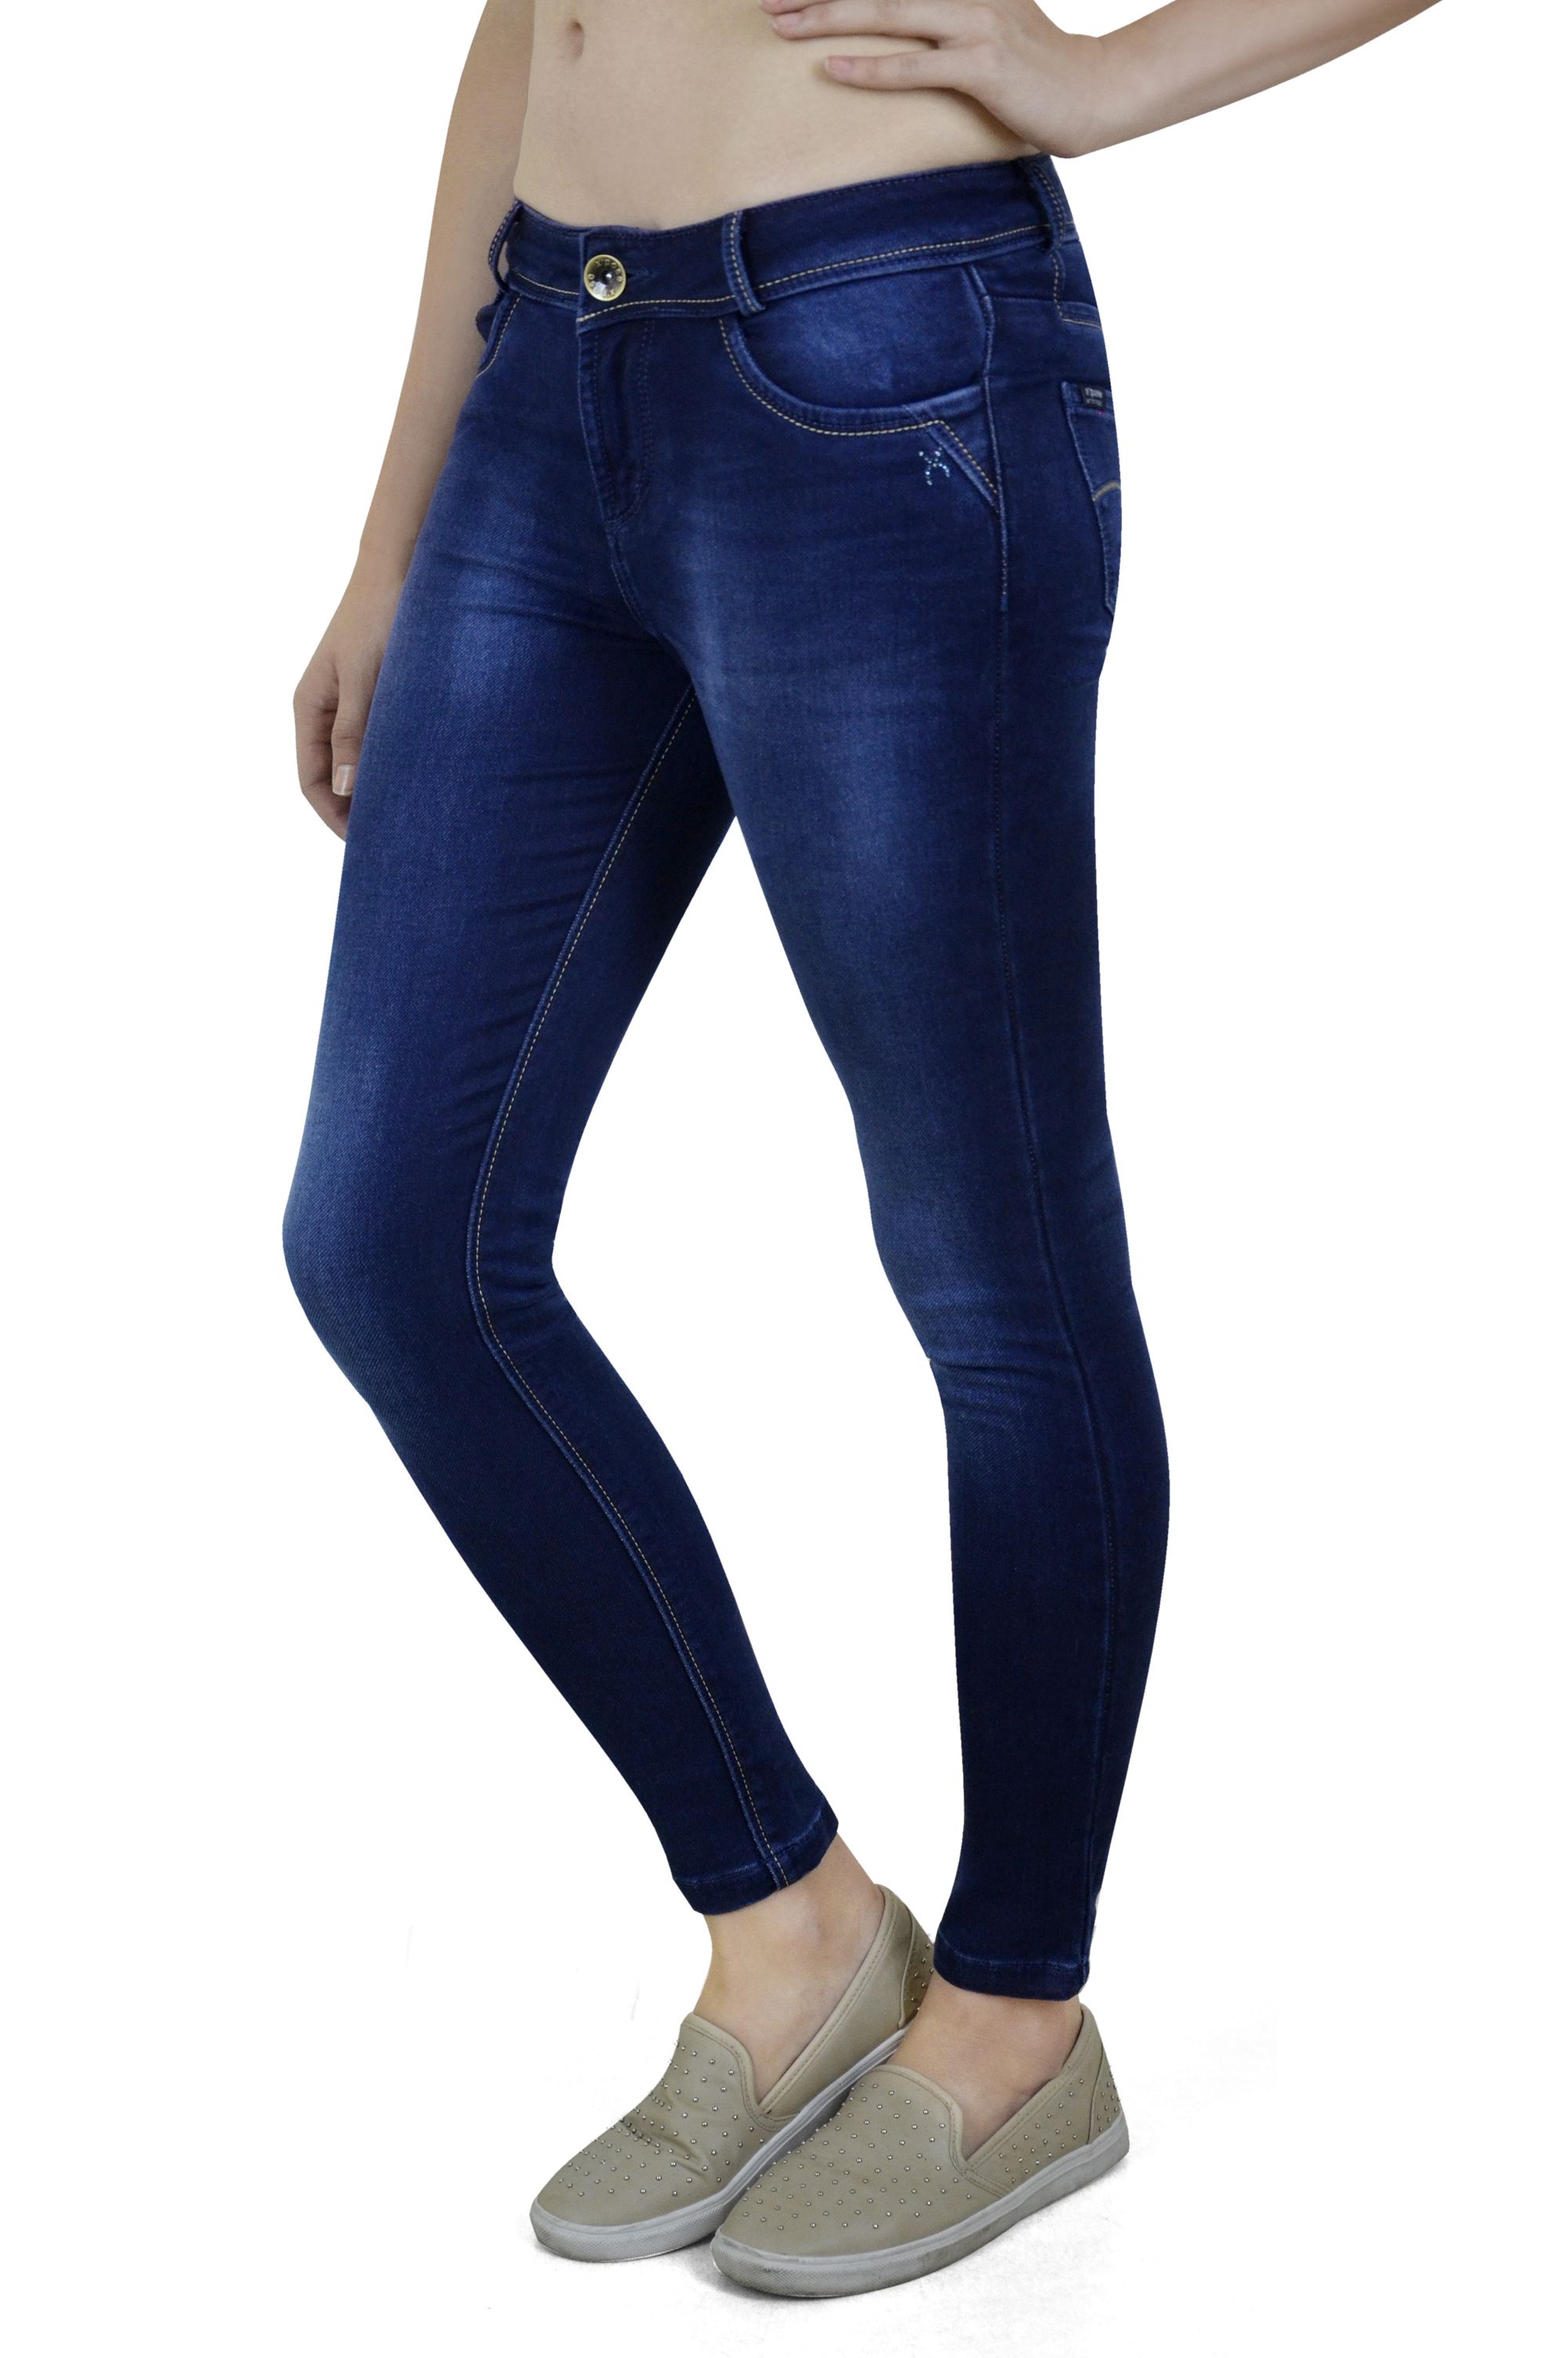 xpose jeans